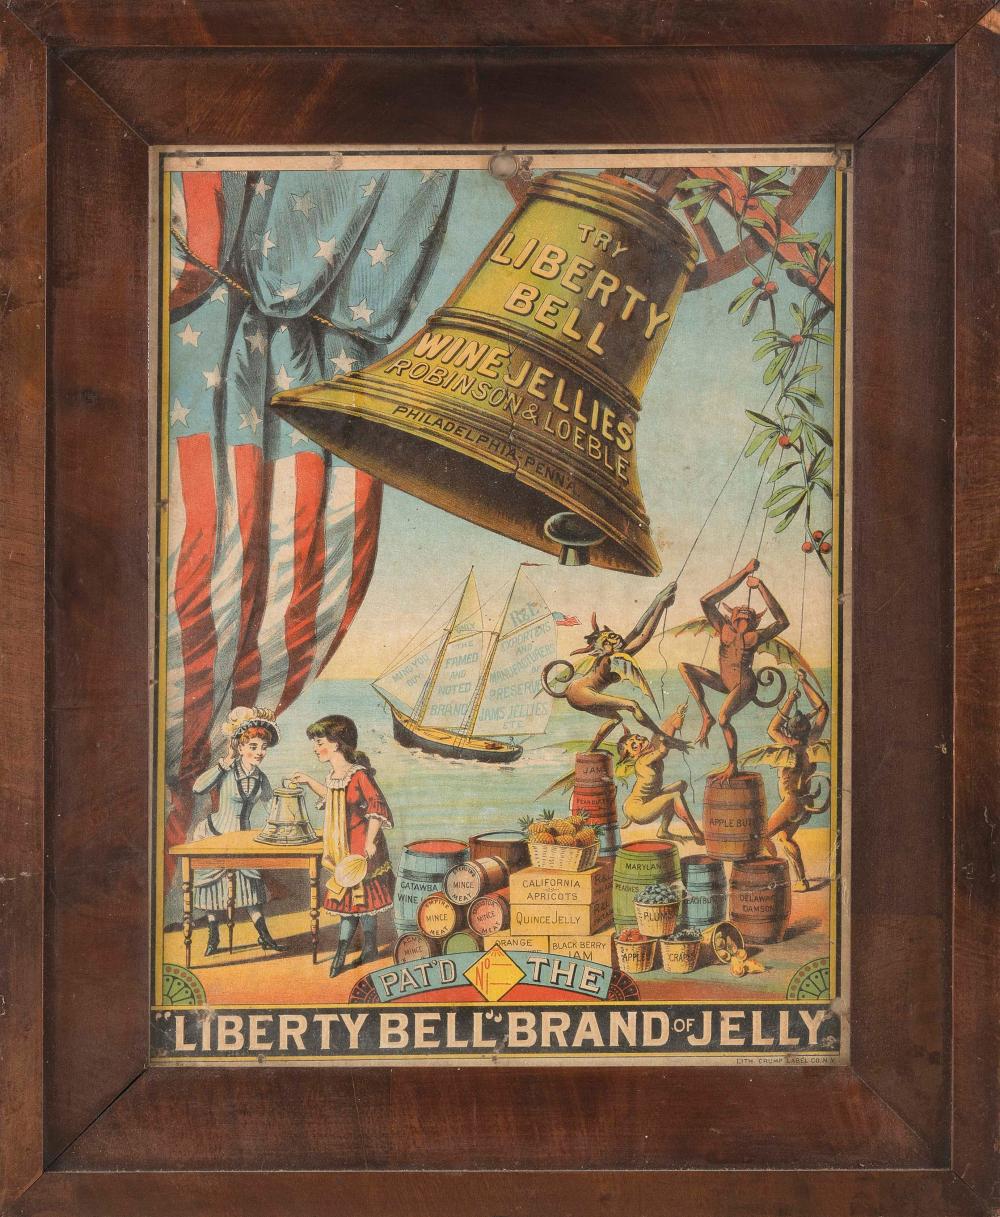  LIBERTY BELL BRAND OF JELLY  350f83